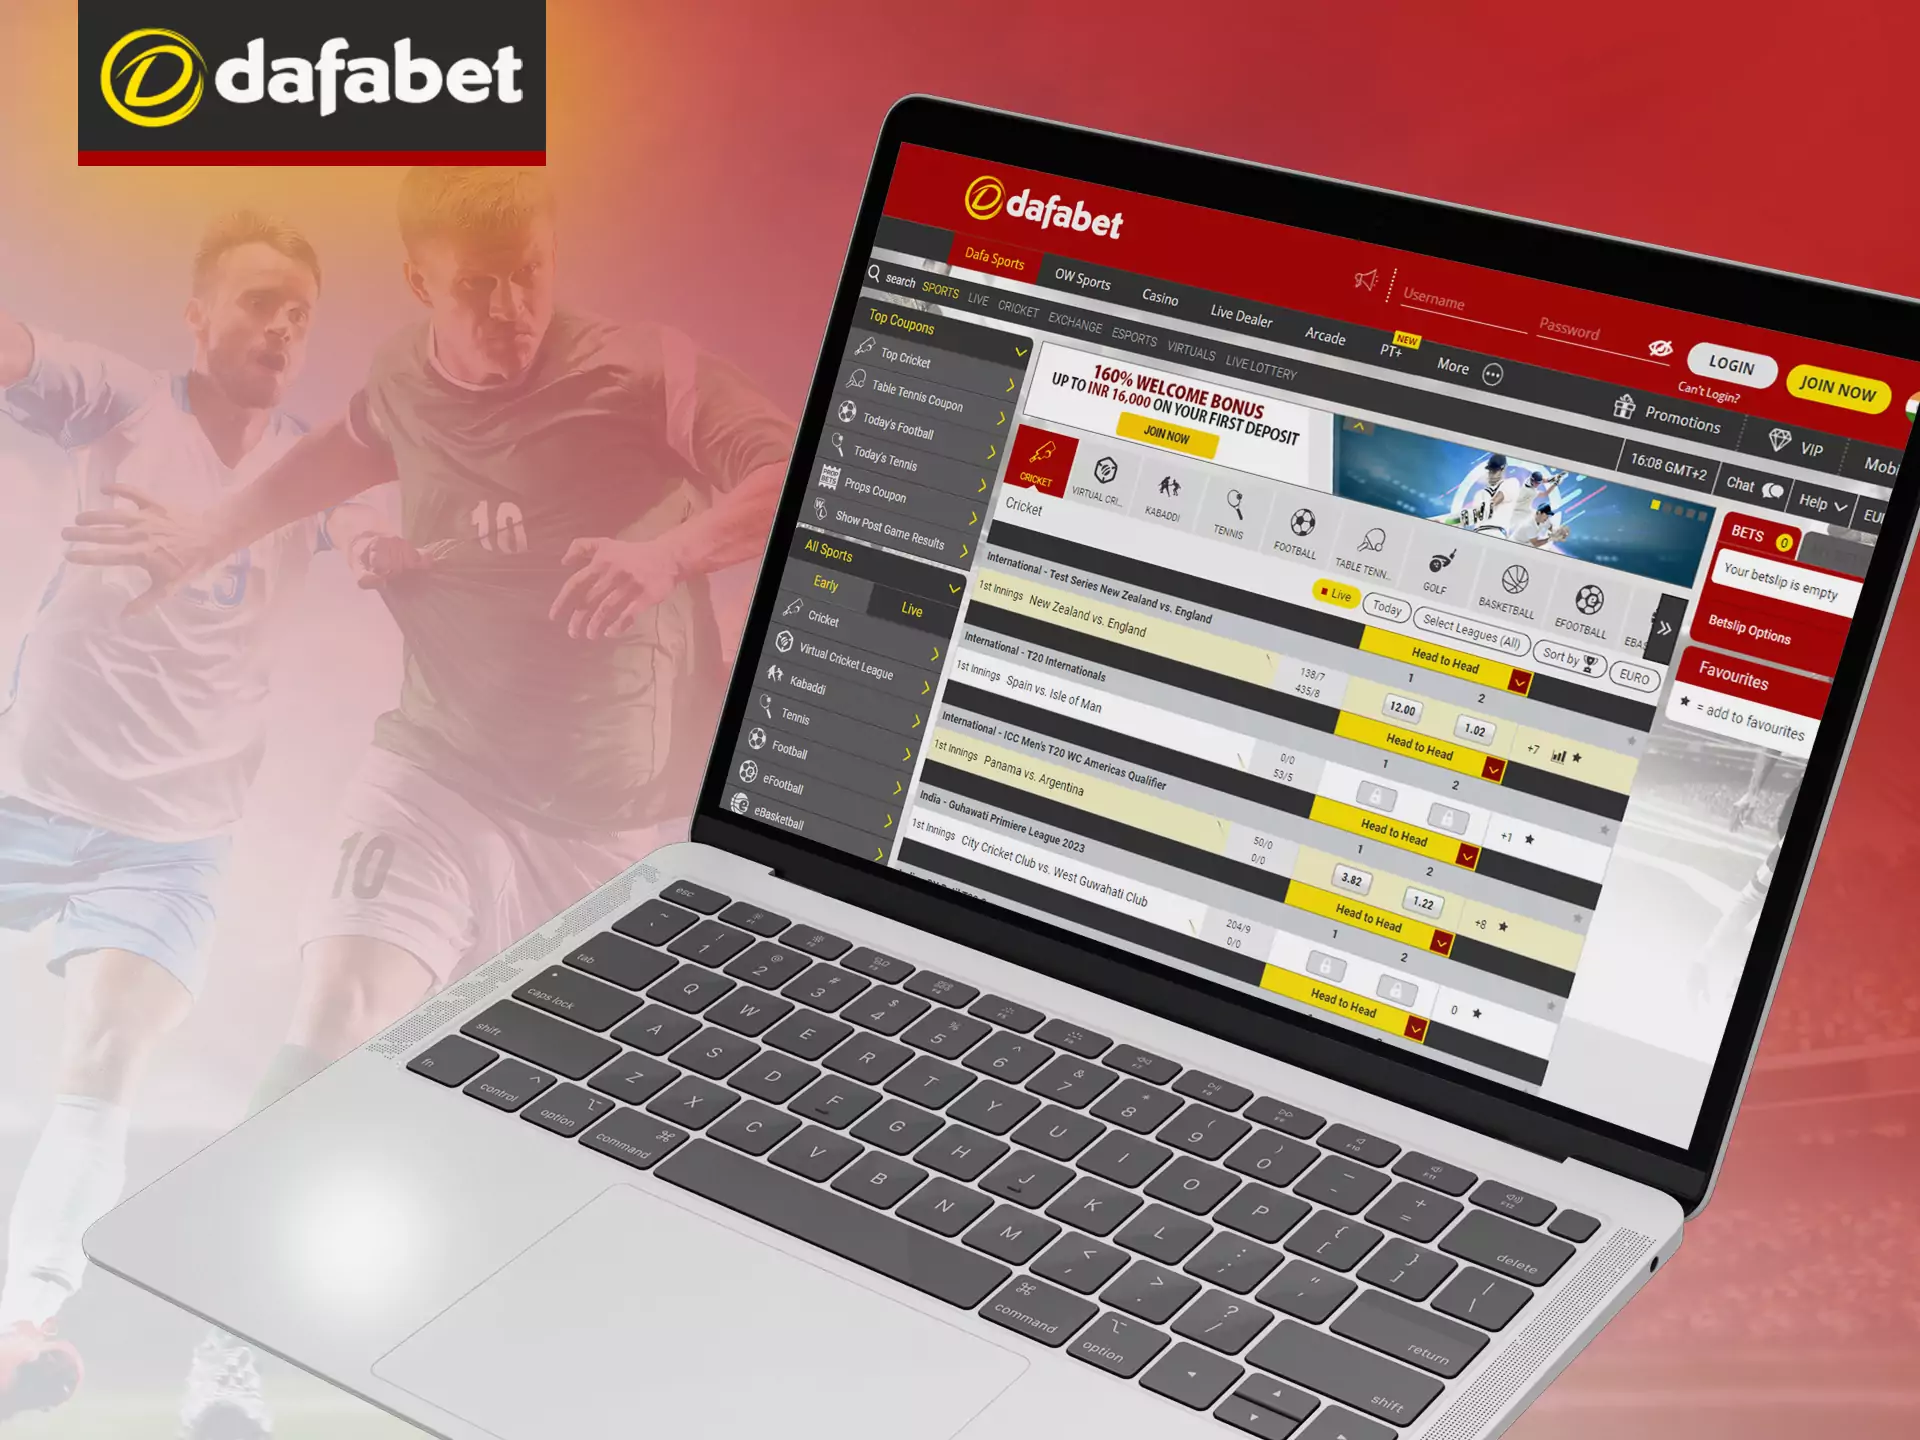 You can bet and play casino on the official Dafabet website.